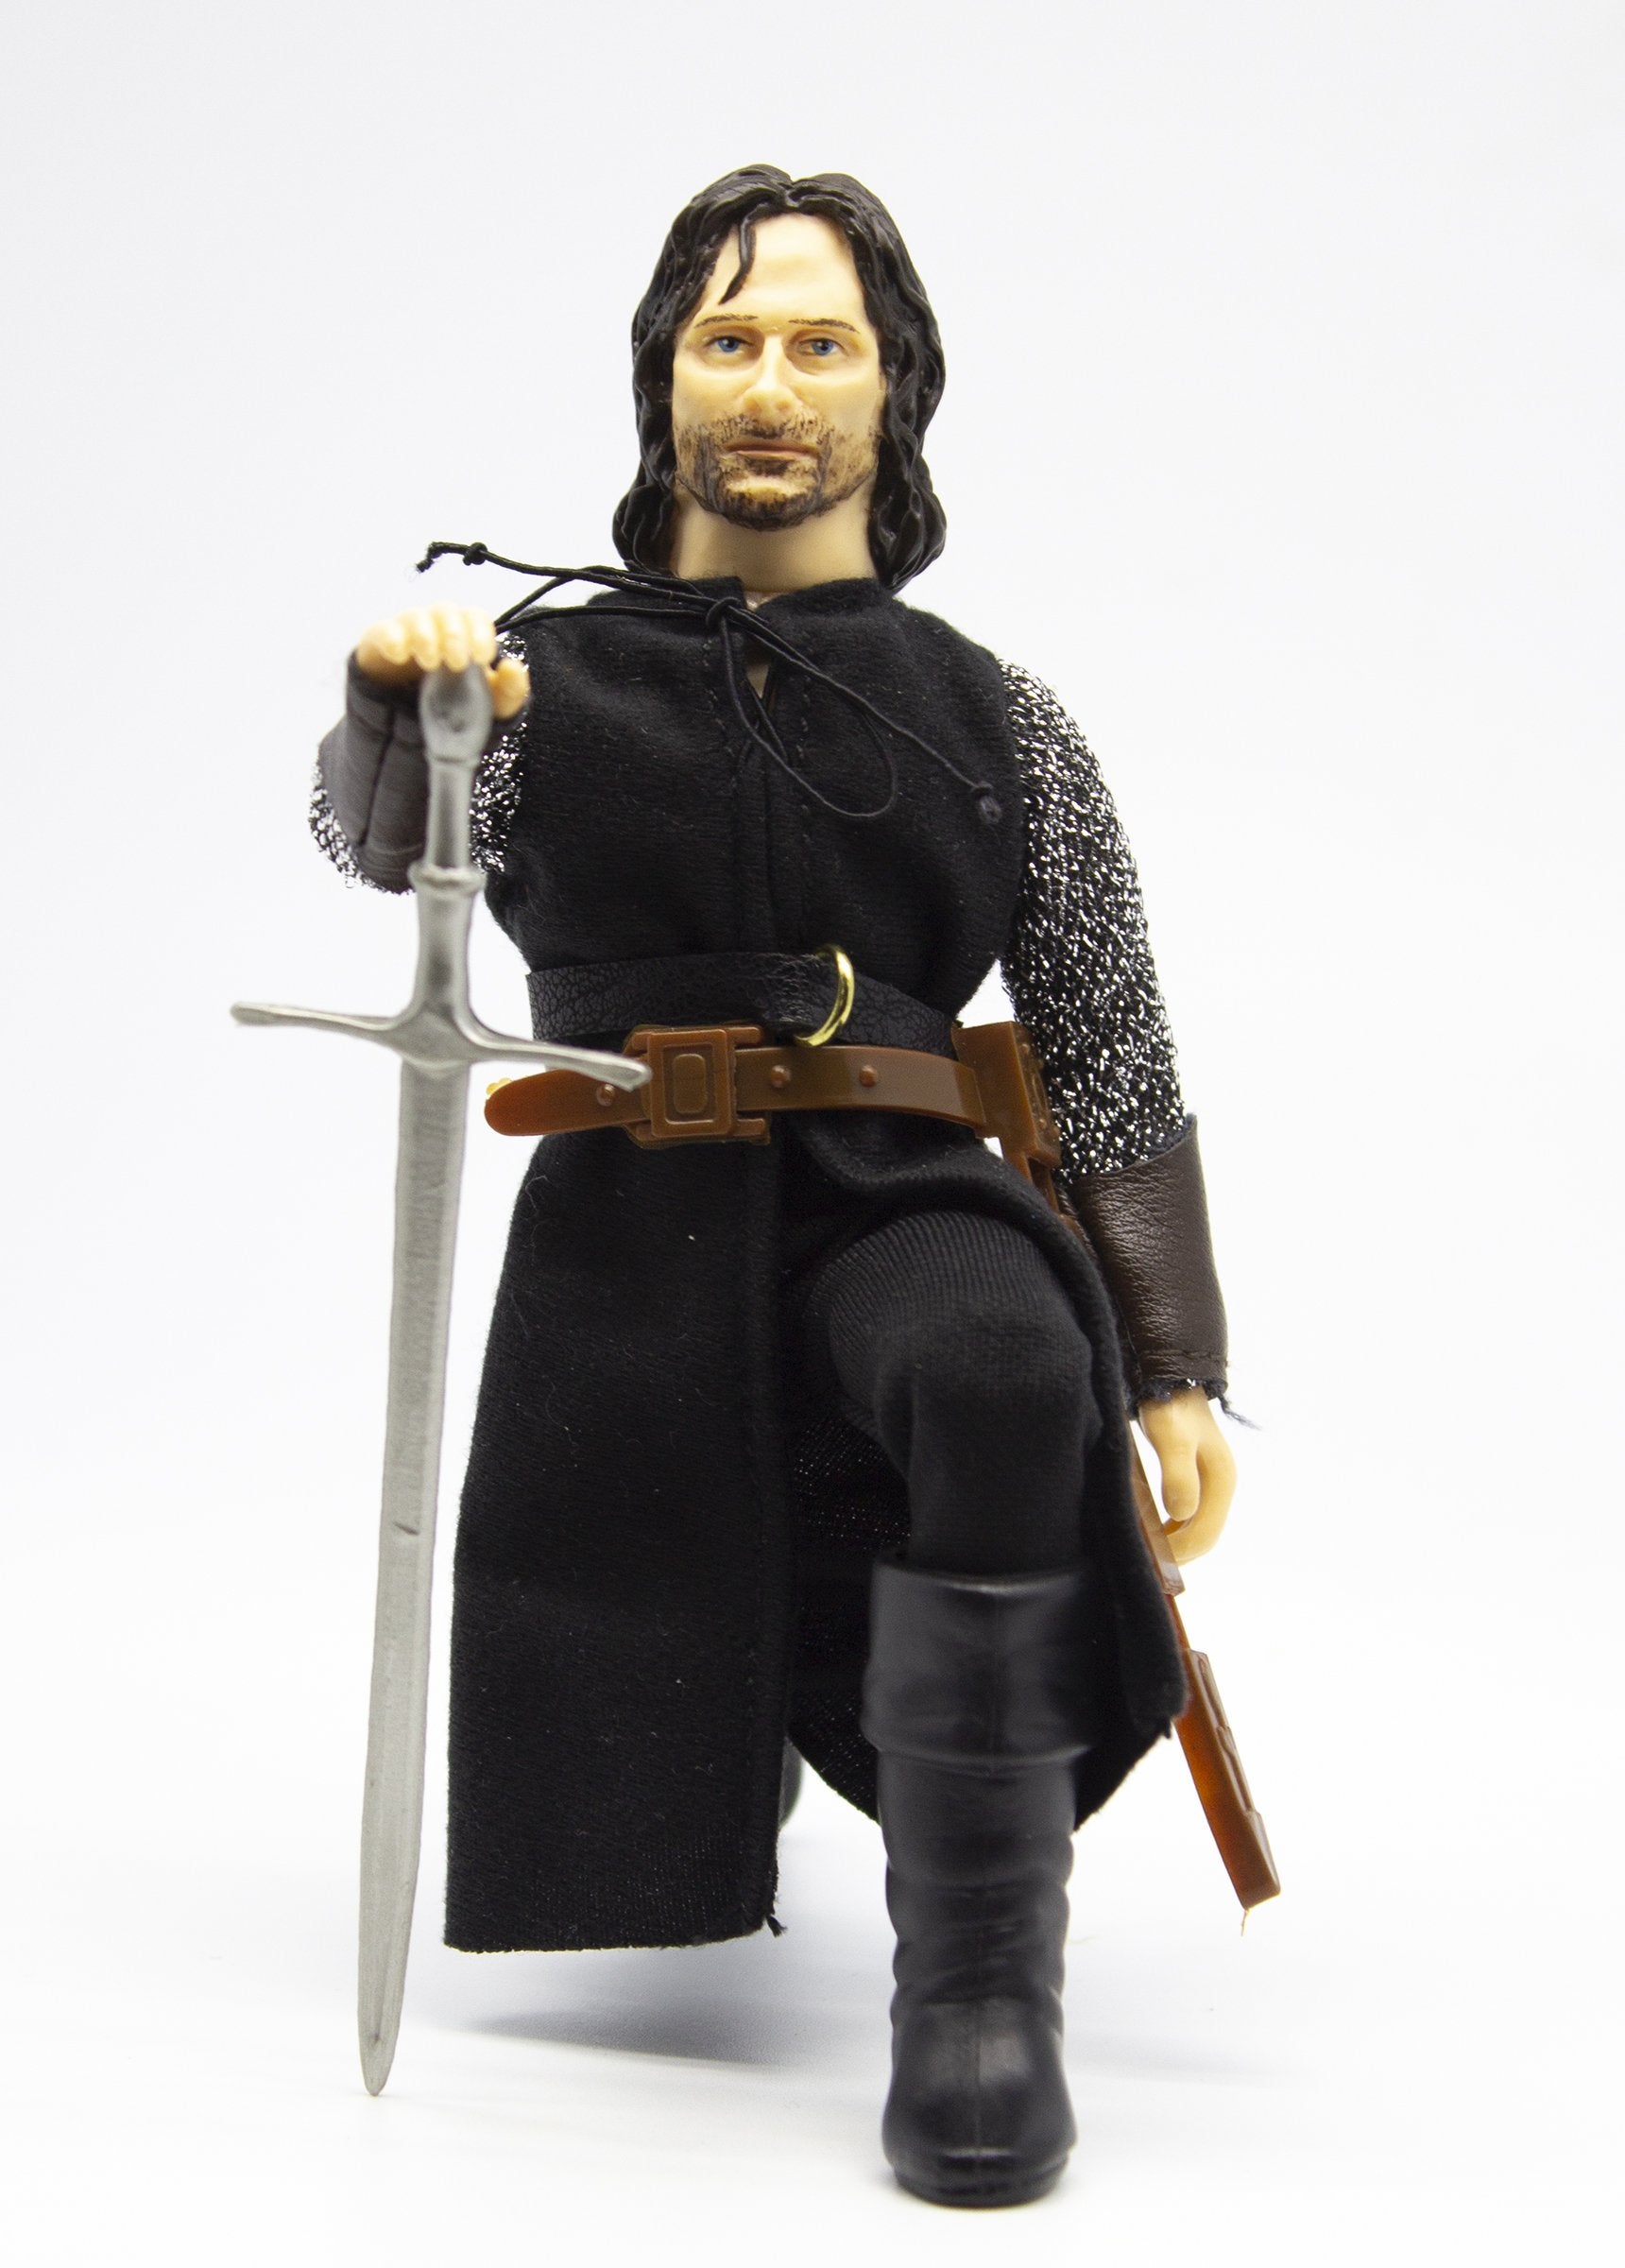 Mego Movies Lord of The Rings - Aragorn 8" Action Figure - Zlc Collectibles